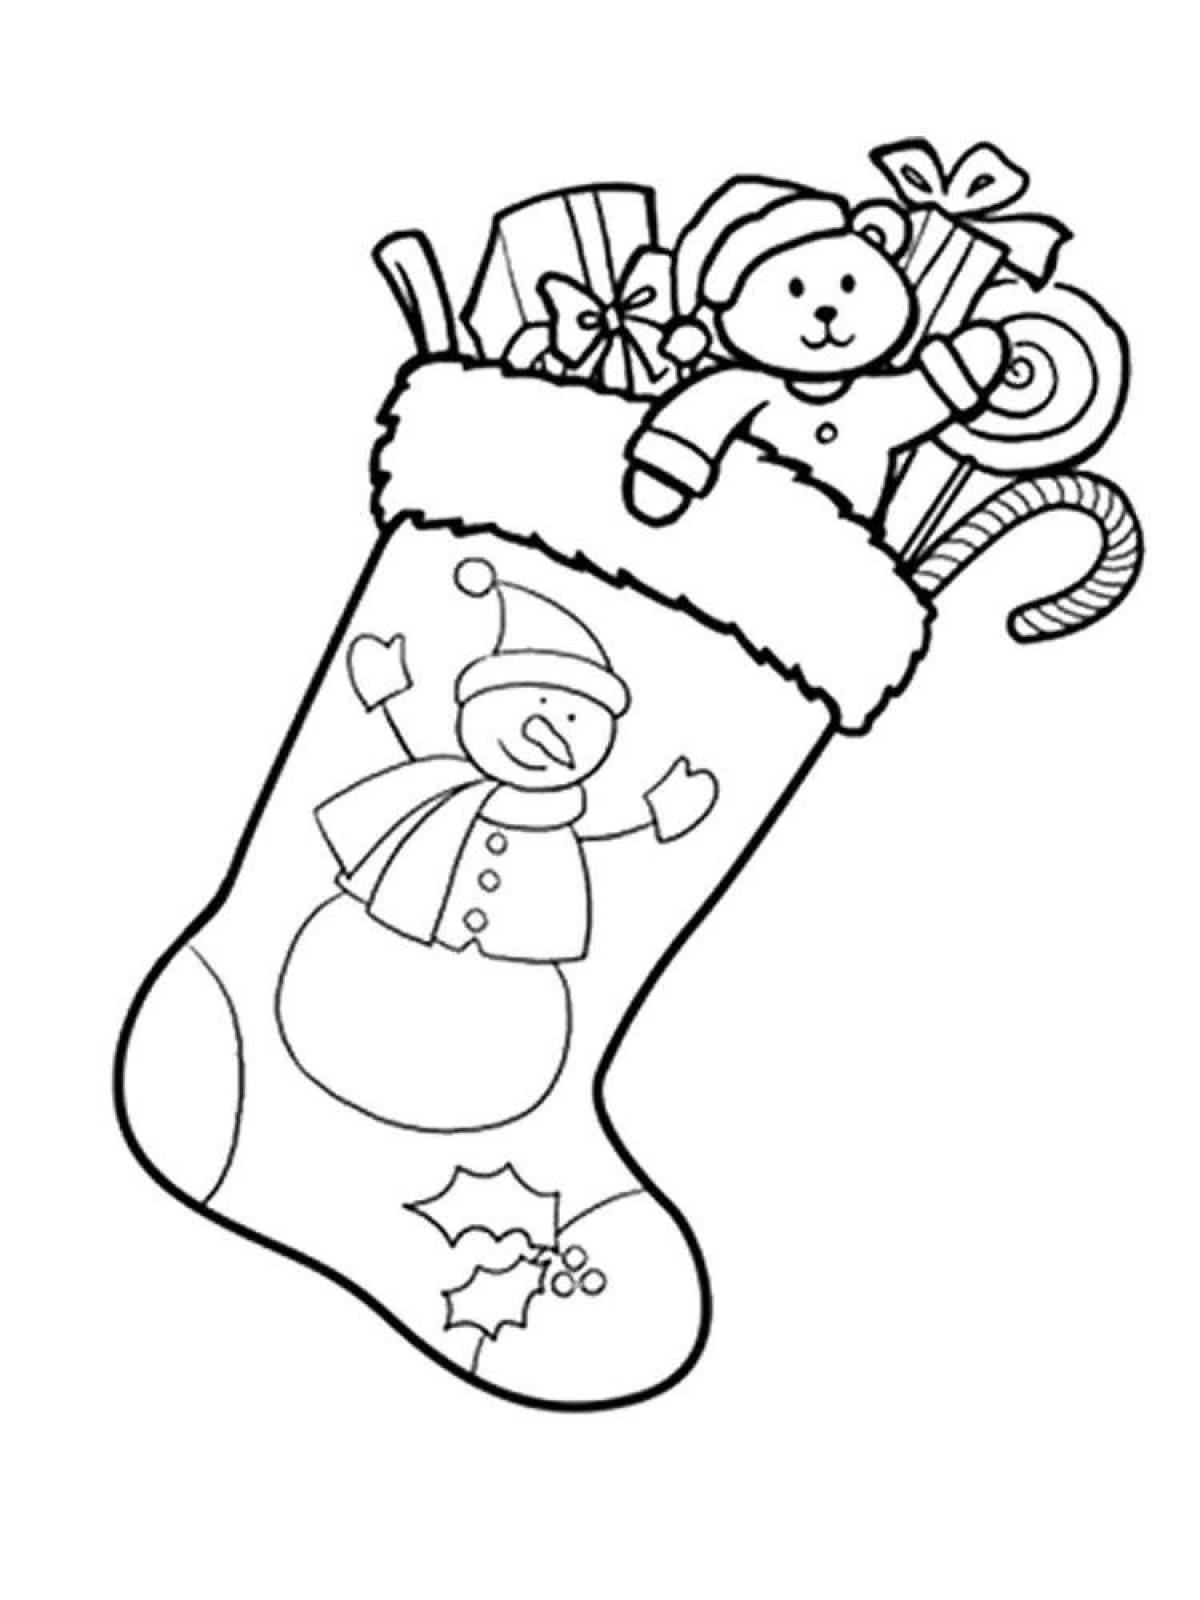 Coloring page festive Christmas sock